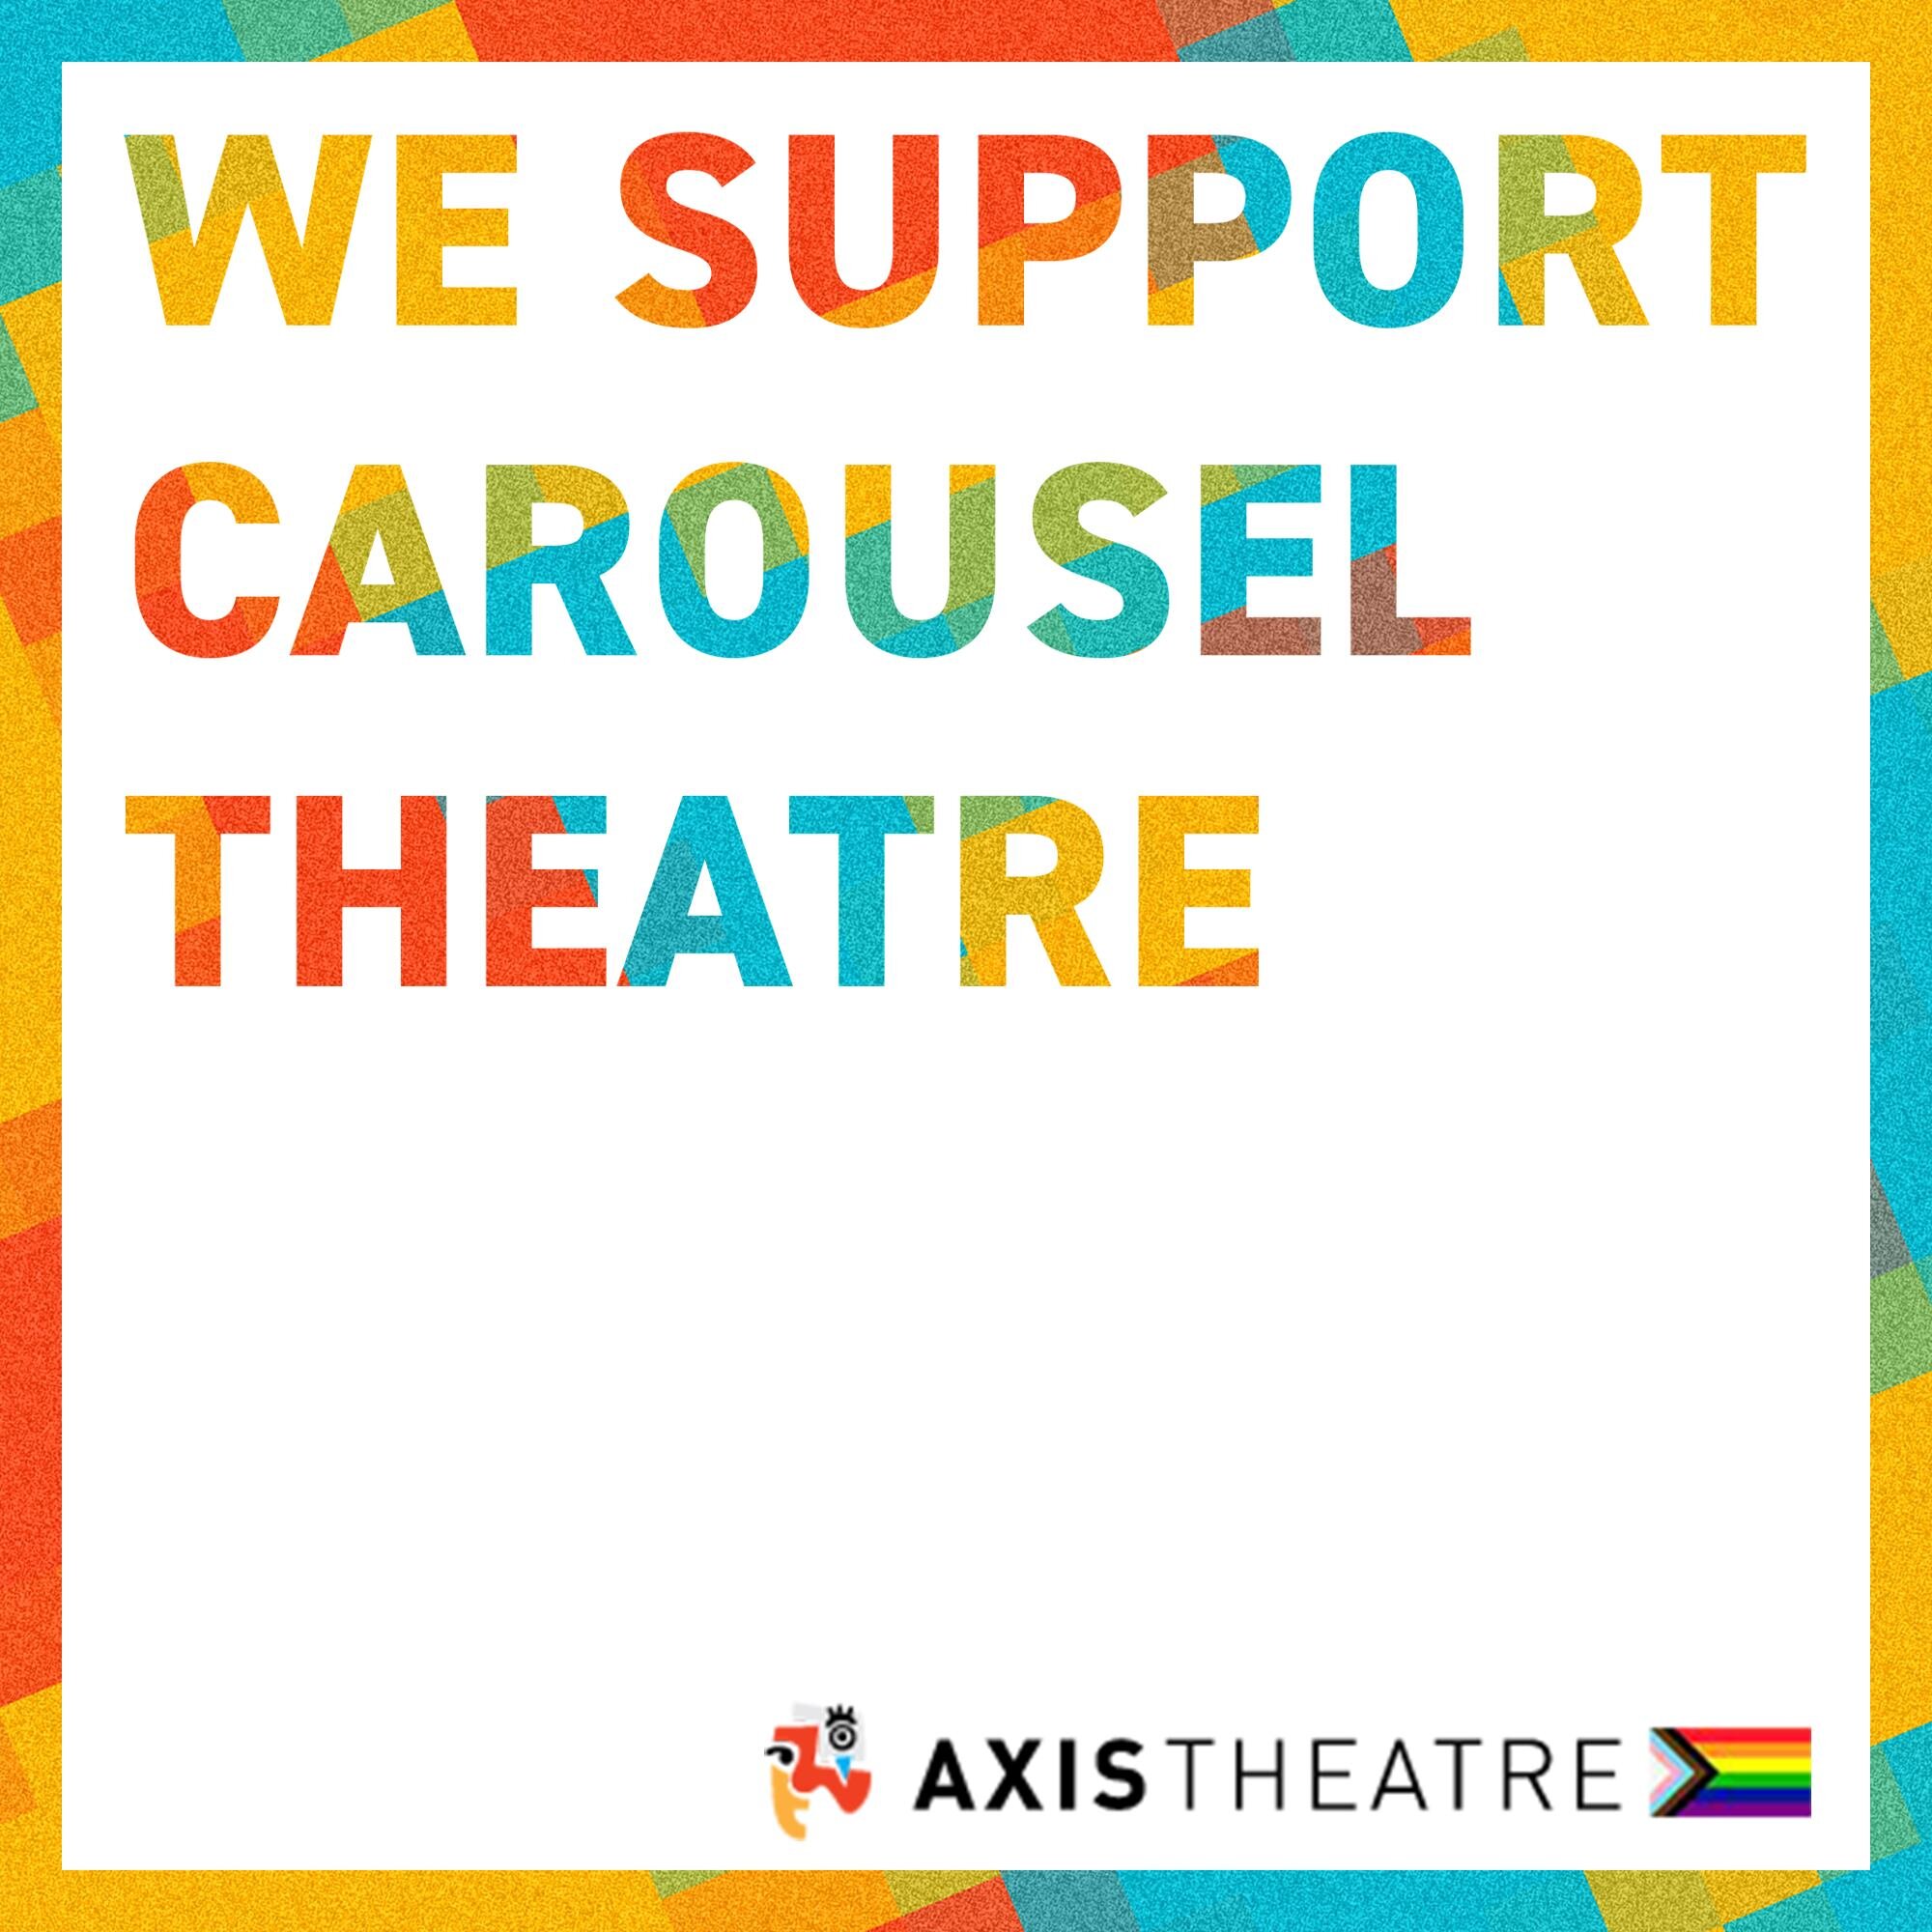 The Axis Theatre team acknowledges the inclusive and necessary programming that Carousel Theatre for Young People provides for young audiences on Granville Island. Carousel&rsquo;s leadership and staff go above and beyond to educate and create safe s